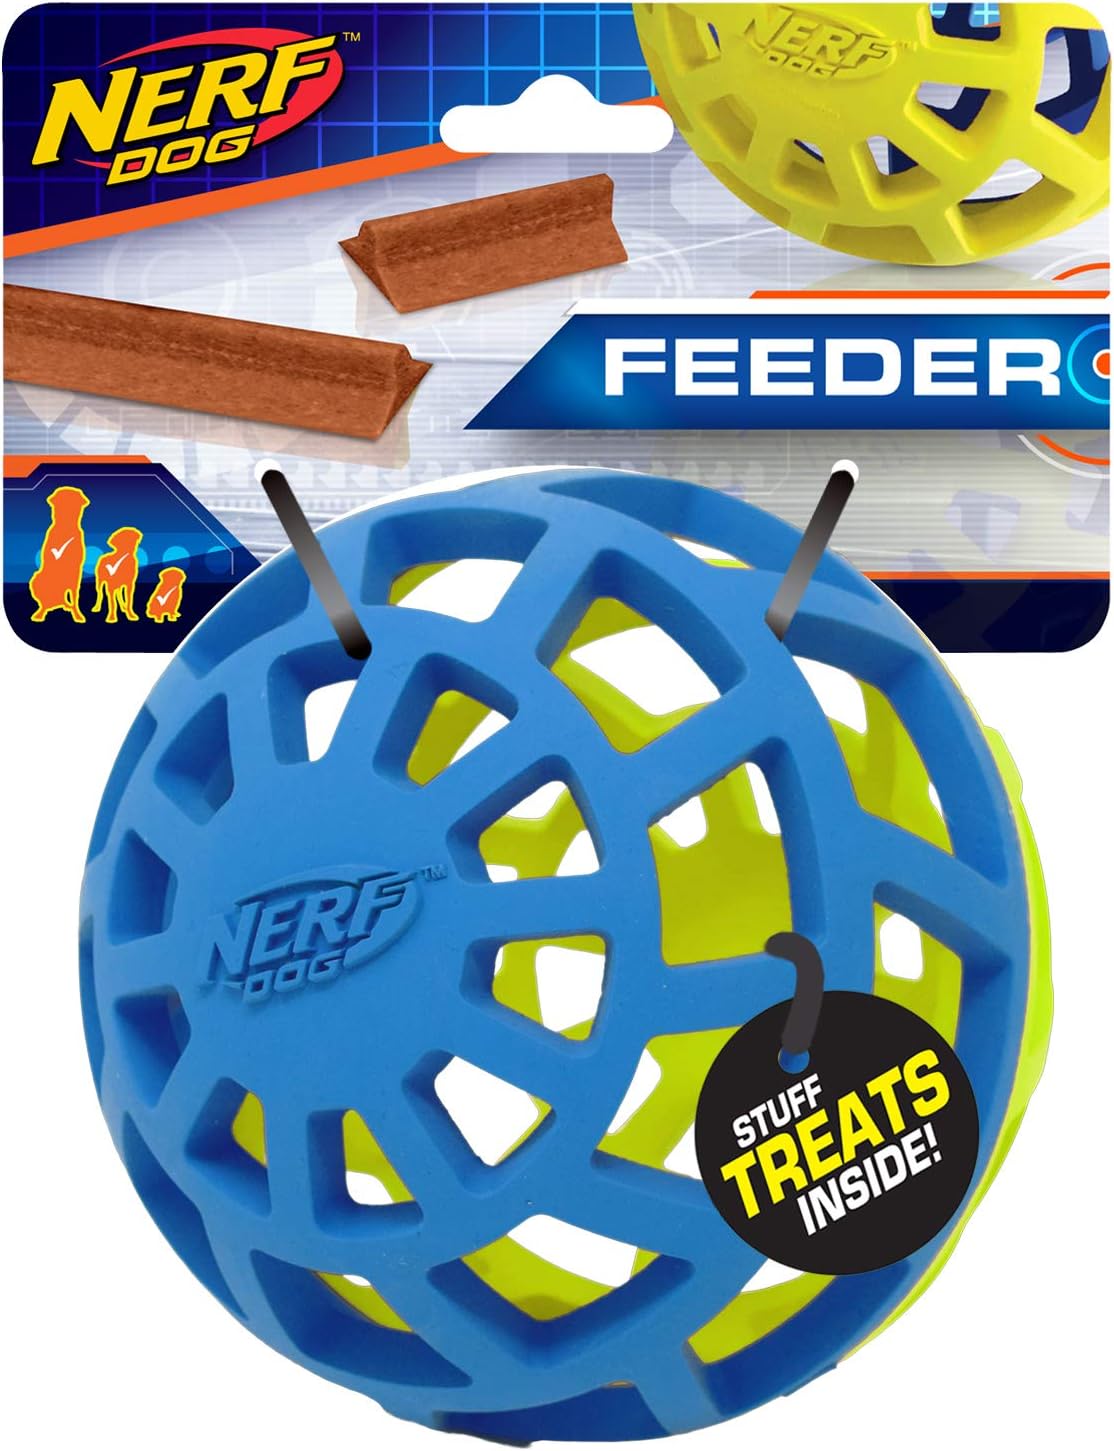 Nerf Dog 5 Inch Durable Treat Feeder Ball for Dogs, Blue/Green